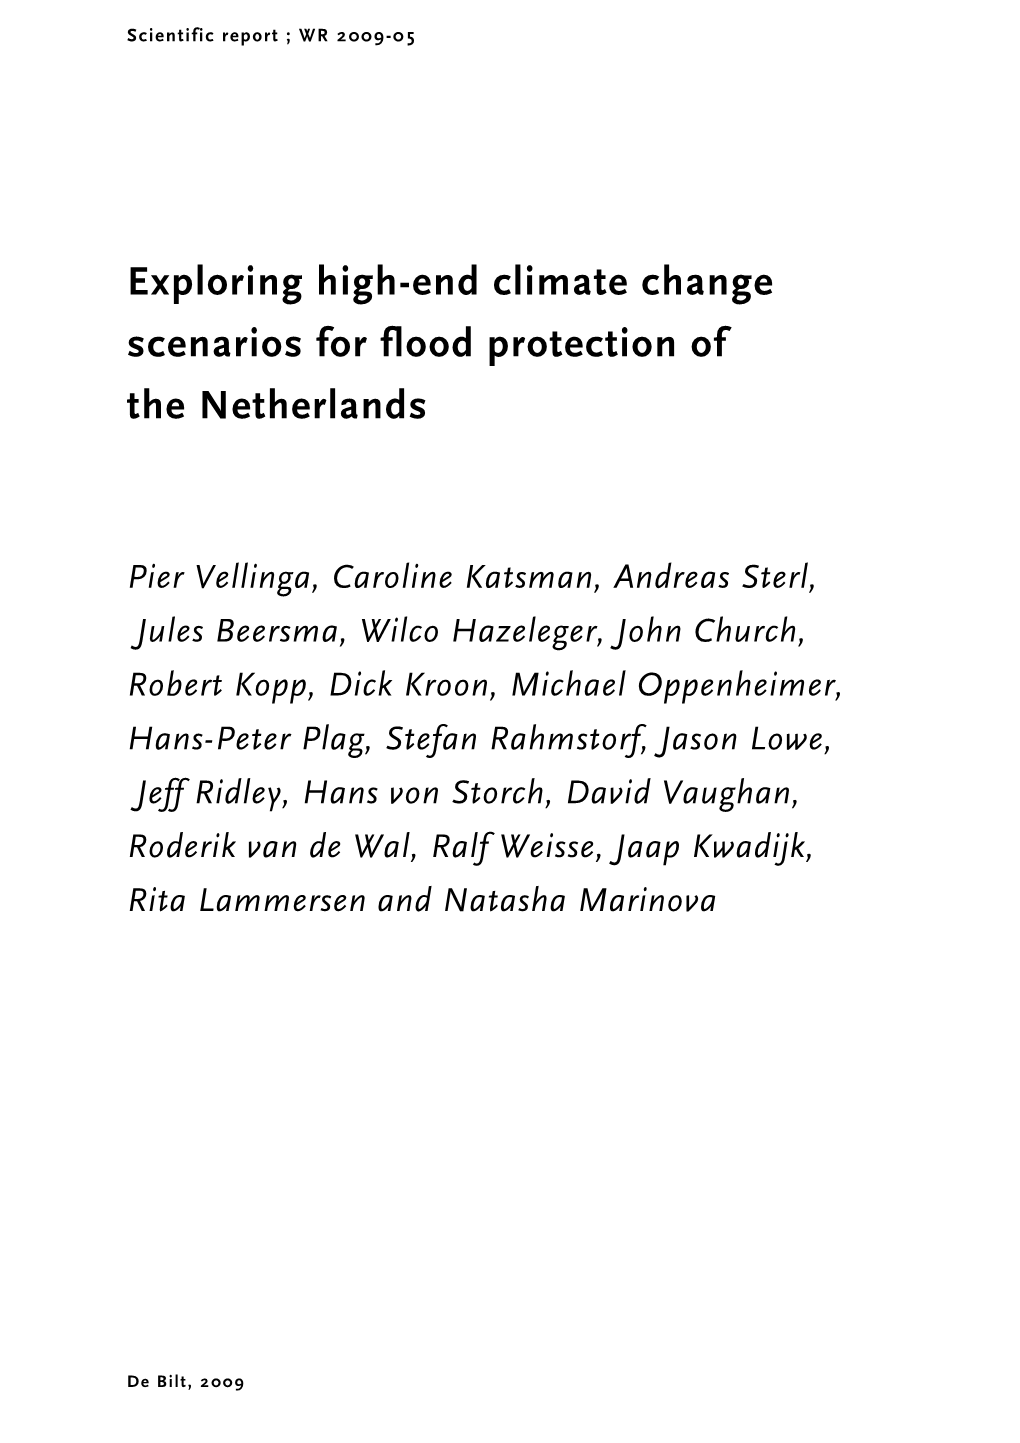 Exploring High-End Climate Change Scenarios for Flood Protection of the Netherlands